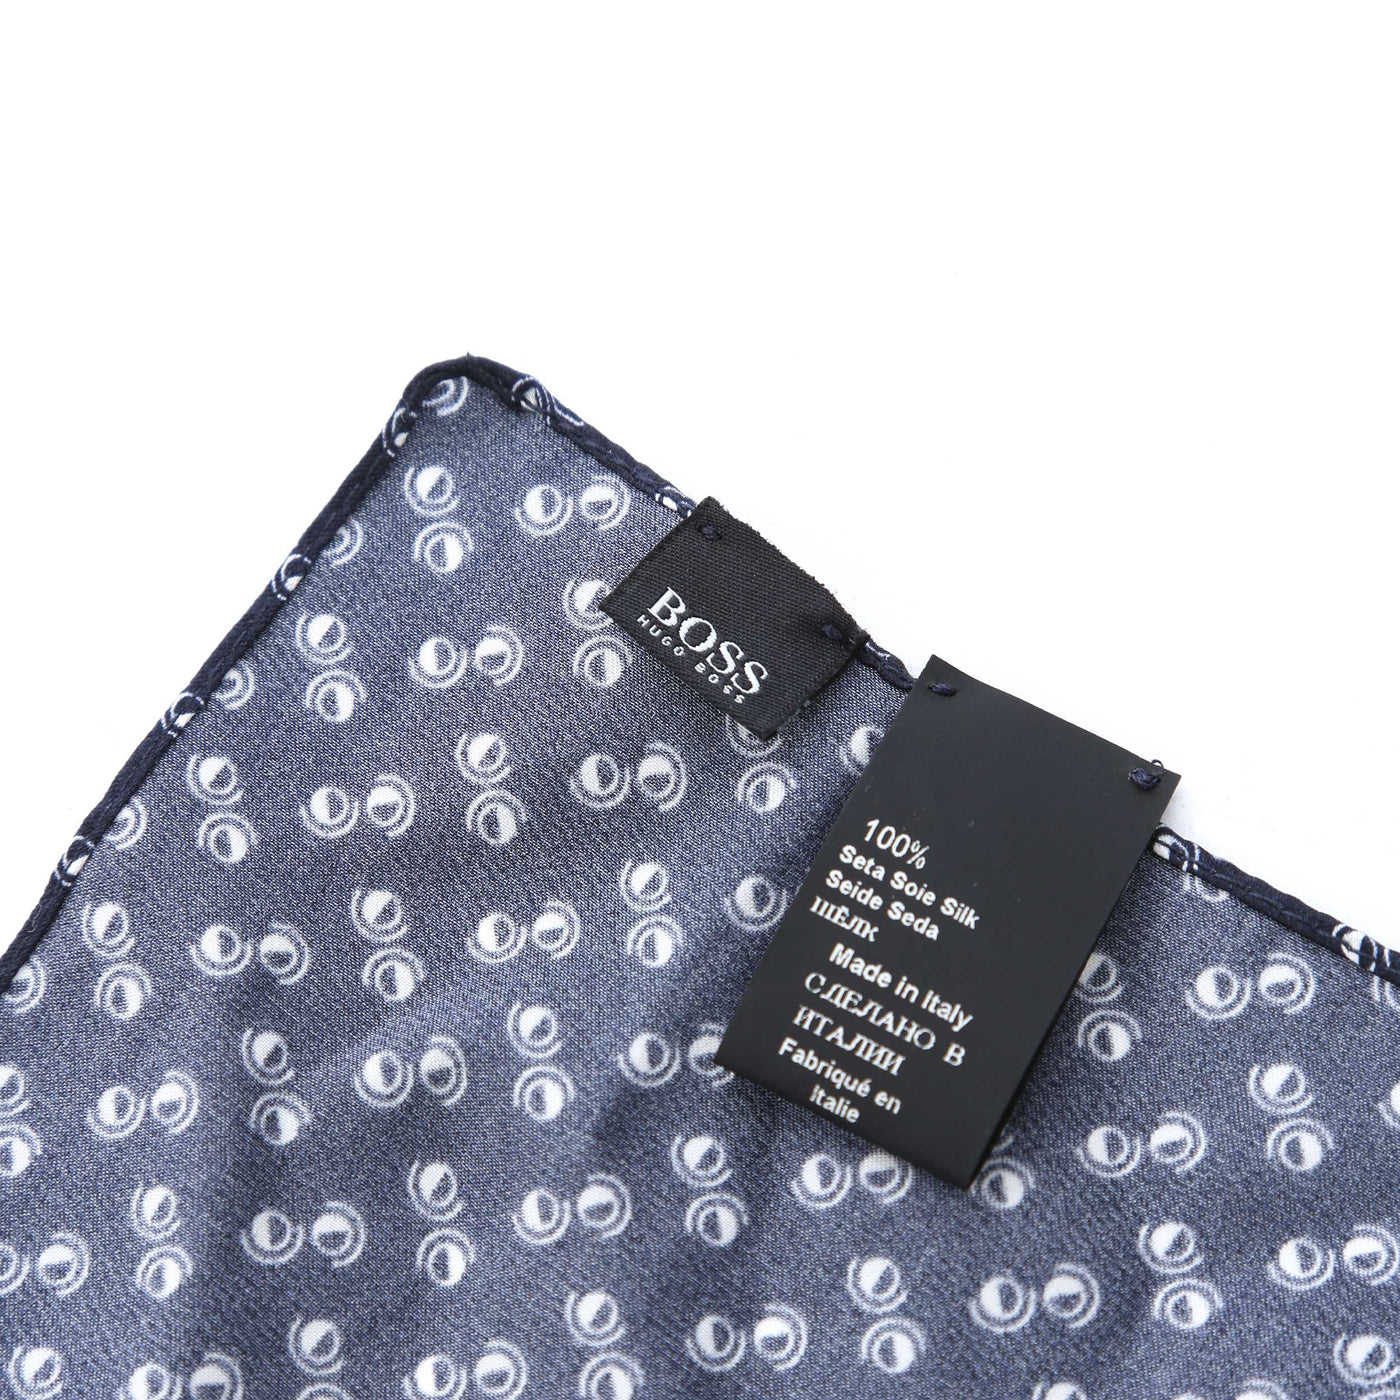 BOSS Circle Pocket Square in Navy Details